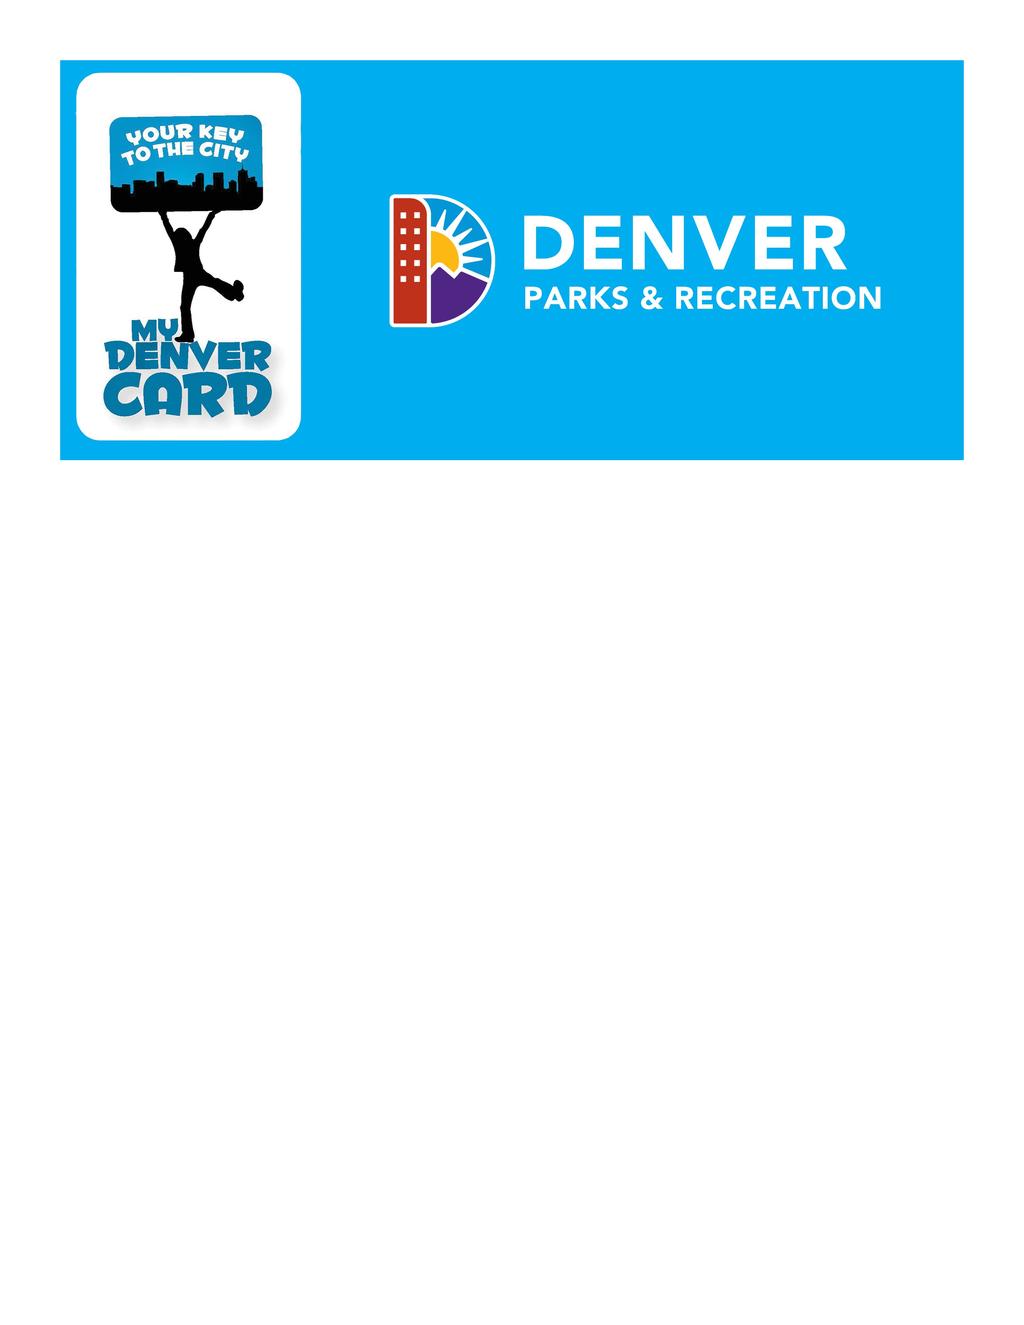 There are currently NO MY Denver activities scheduled at this recreation center. MY Denver Cardholders can access any Denver Recreation Center.